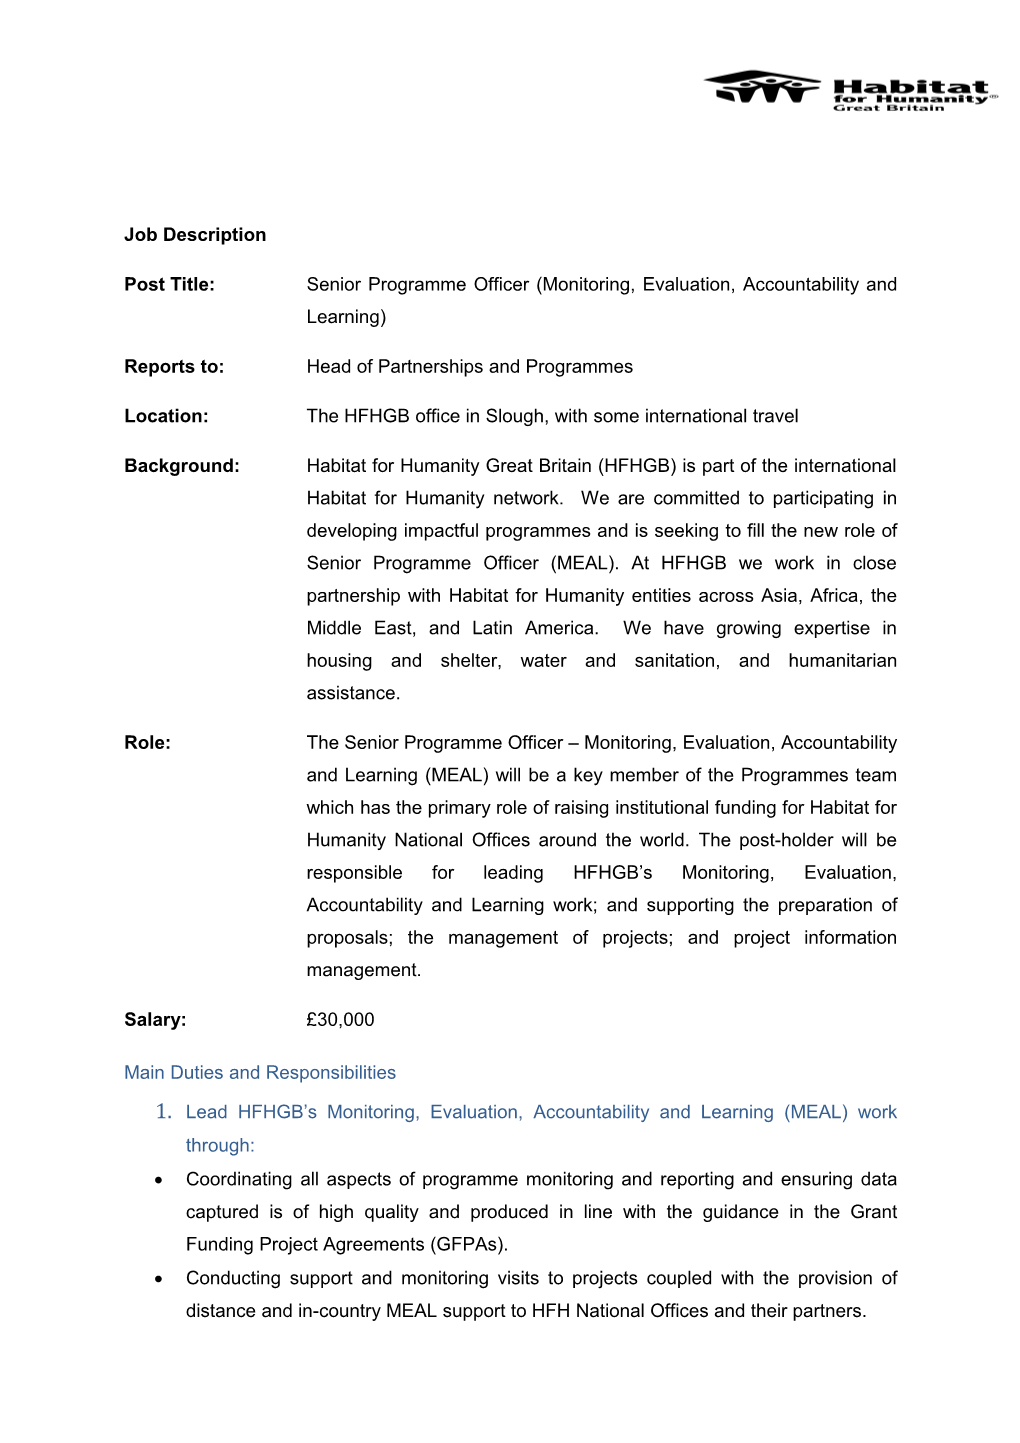 Post Title:Senior Programme Officer (Monitoring, Evaluation, Accountability and Learning)